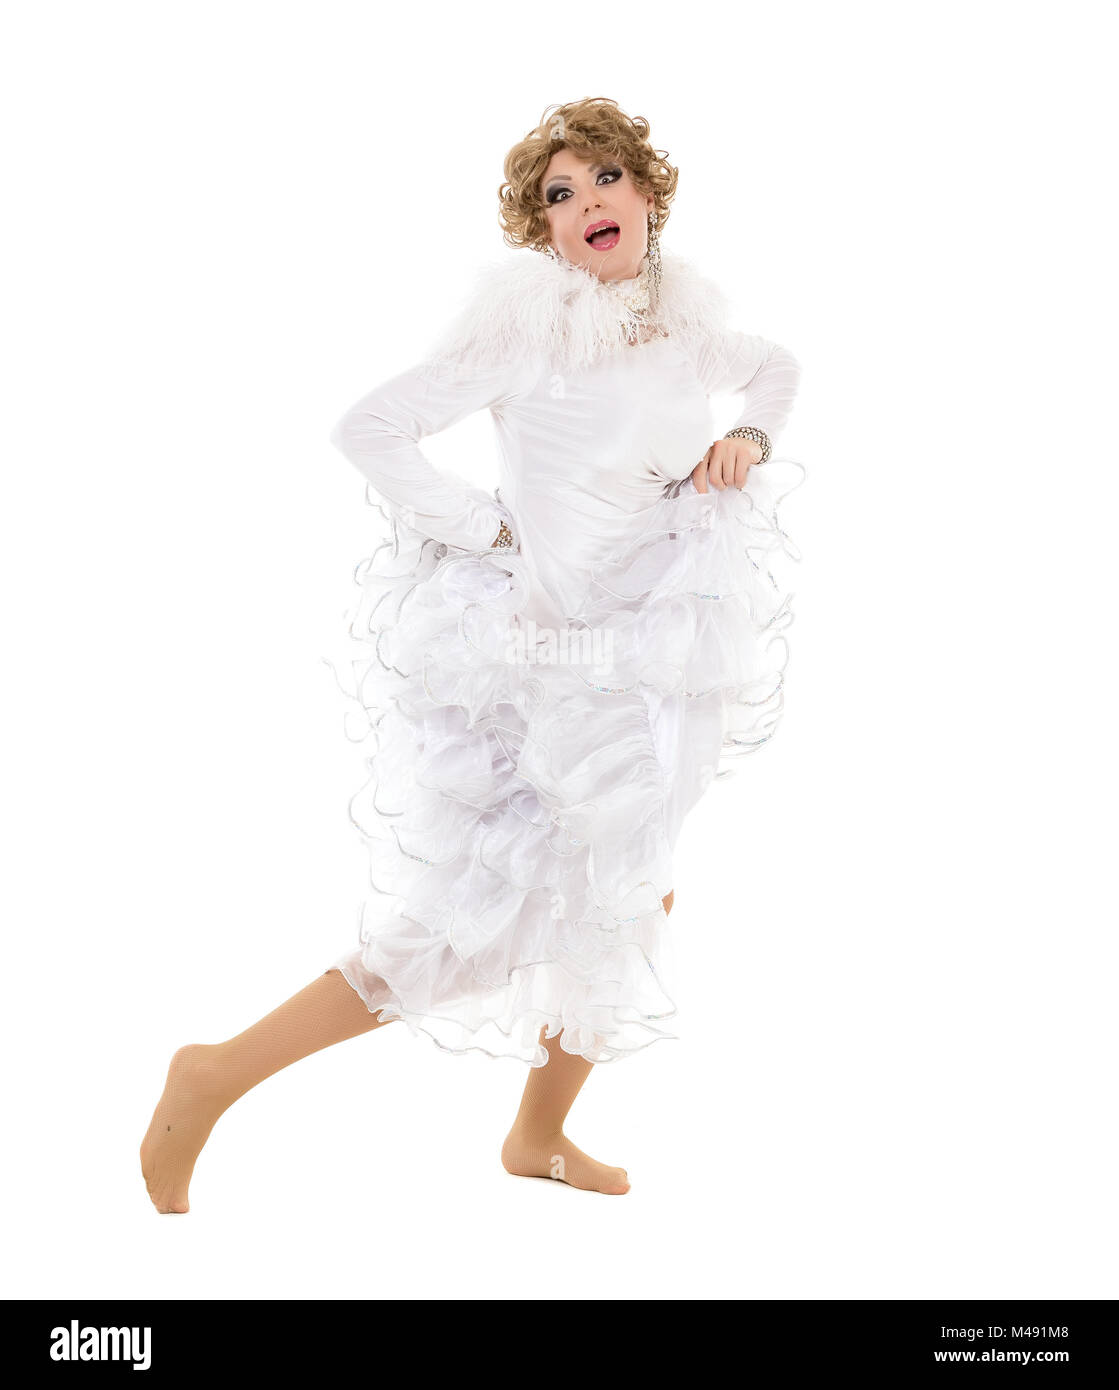 Portrait Drag Queen in White Dress Performing Stock Photo